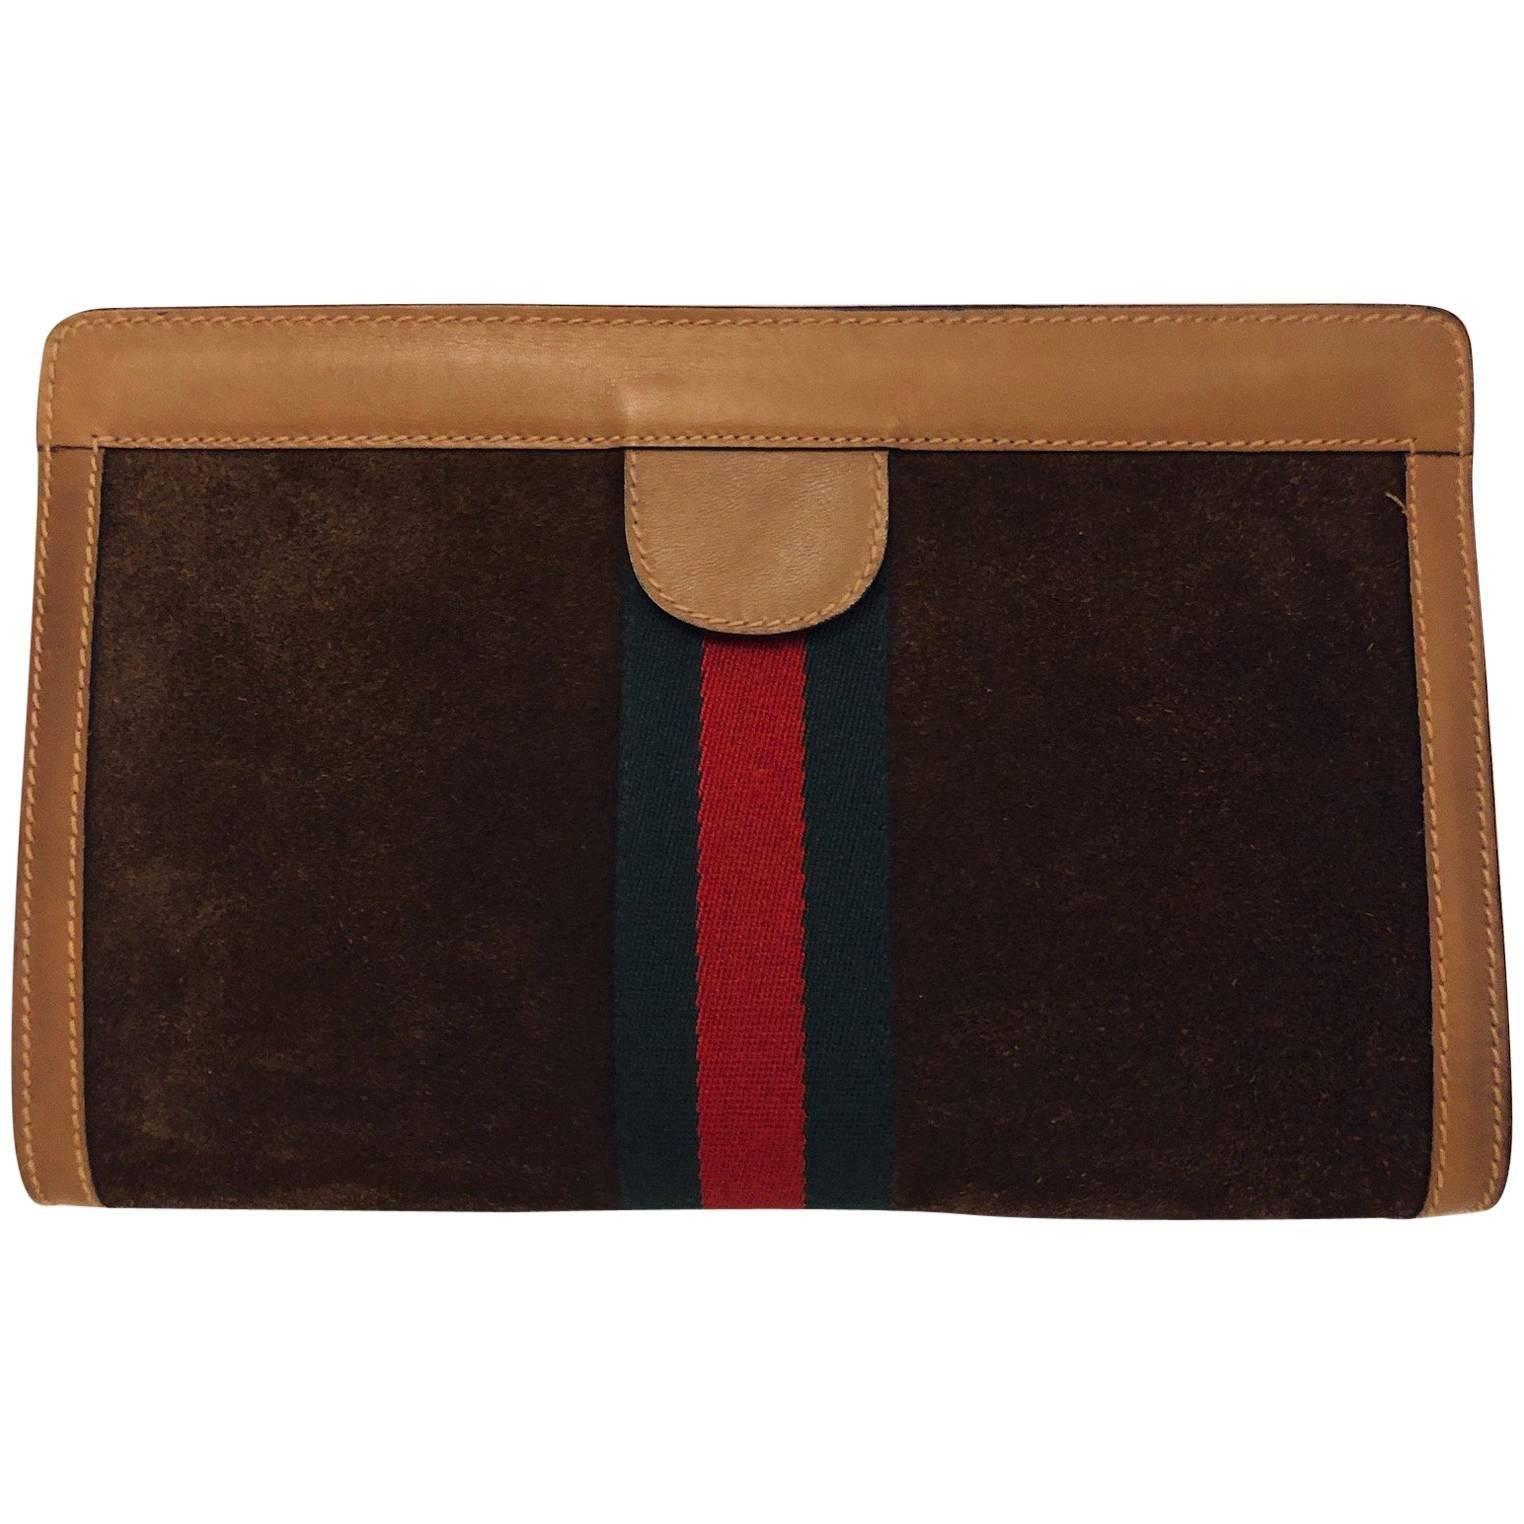 Gucci Parfums Vintage Brown Suede Clutch With Signature Web 